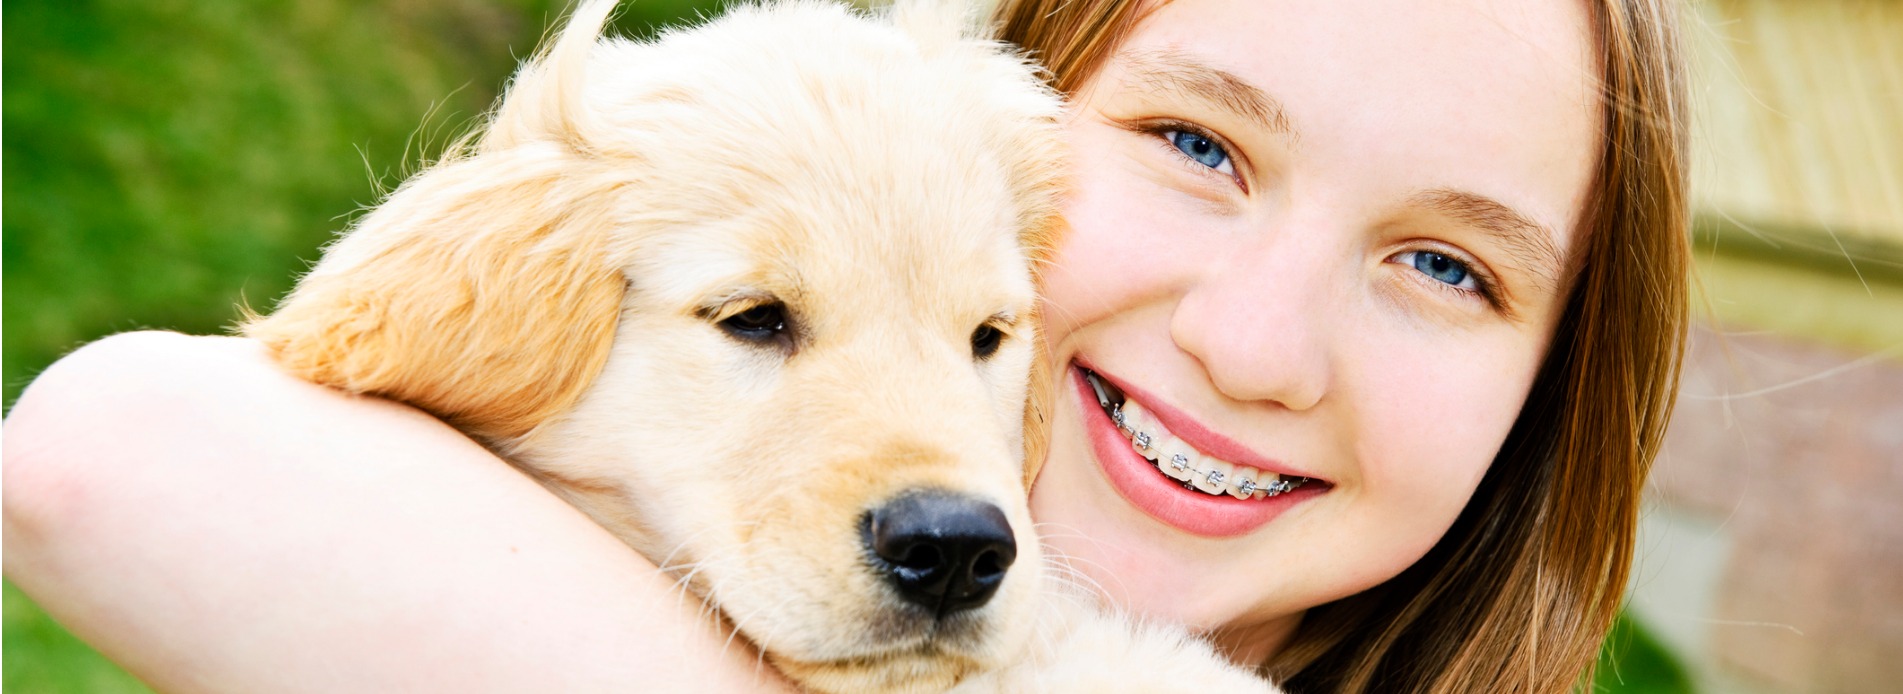 girl smiling holding a puppy dog picture